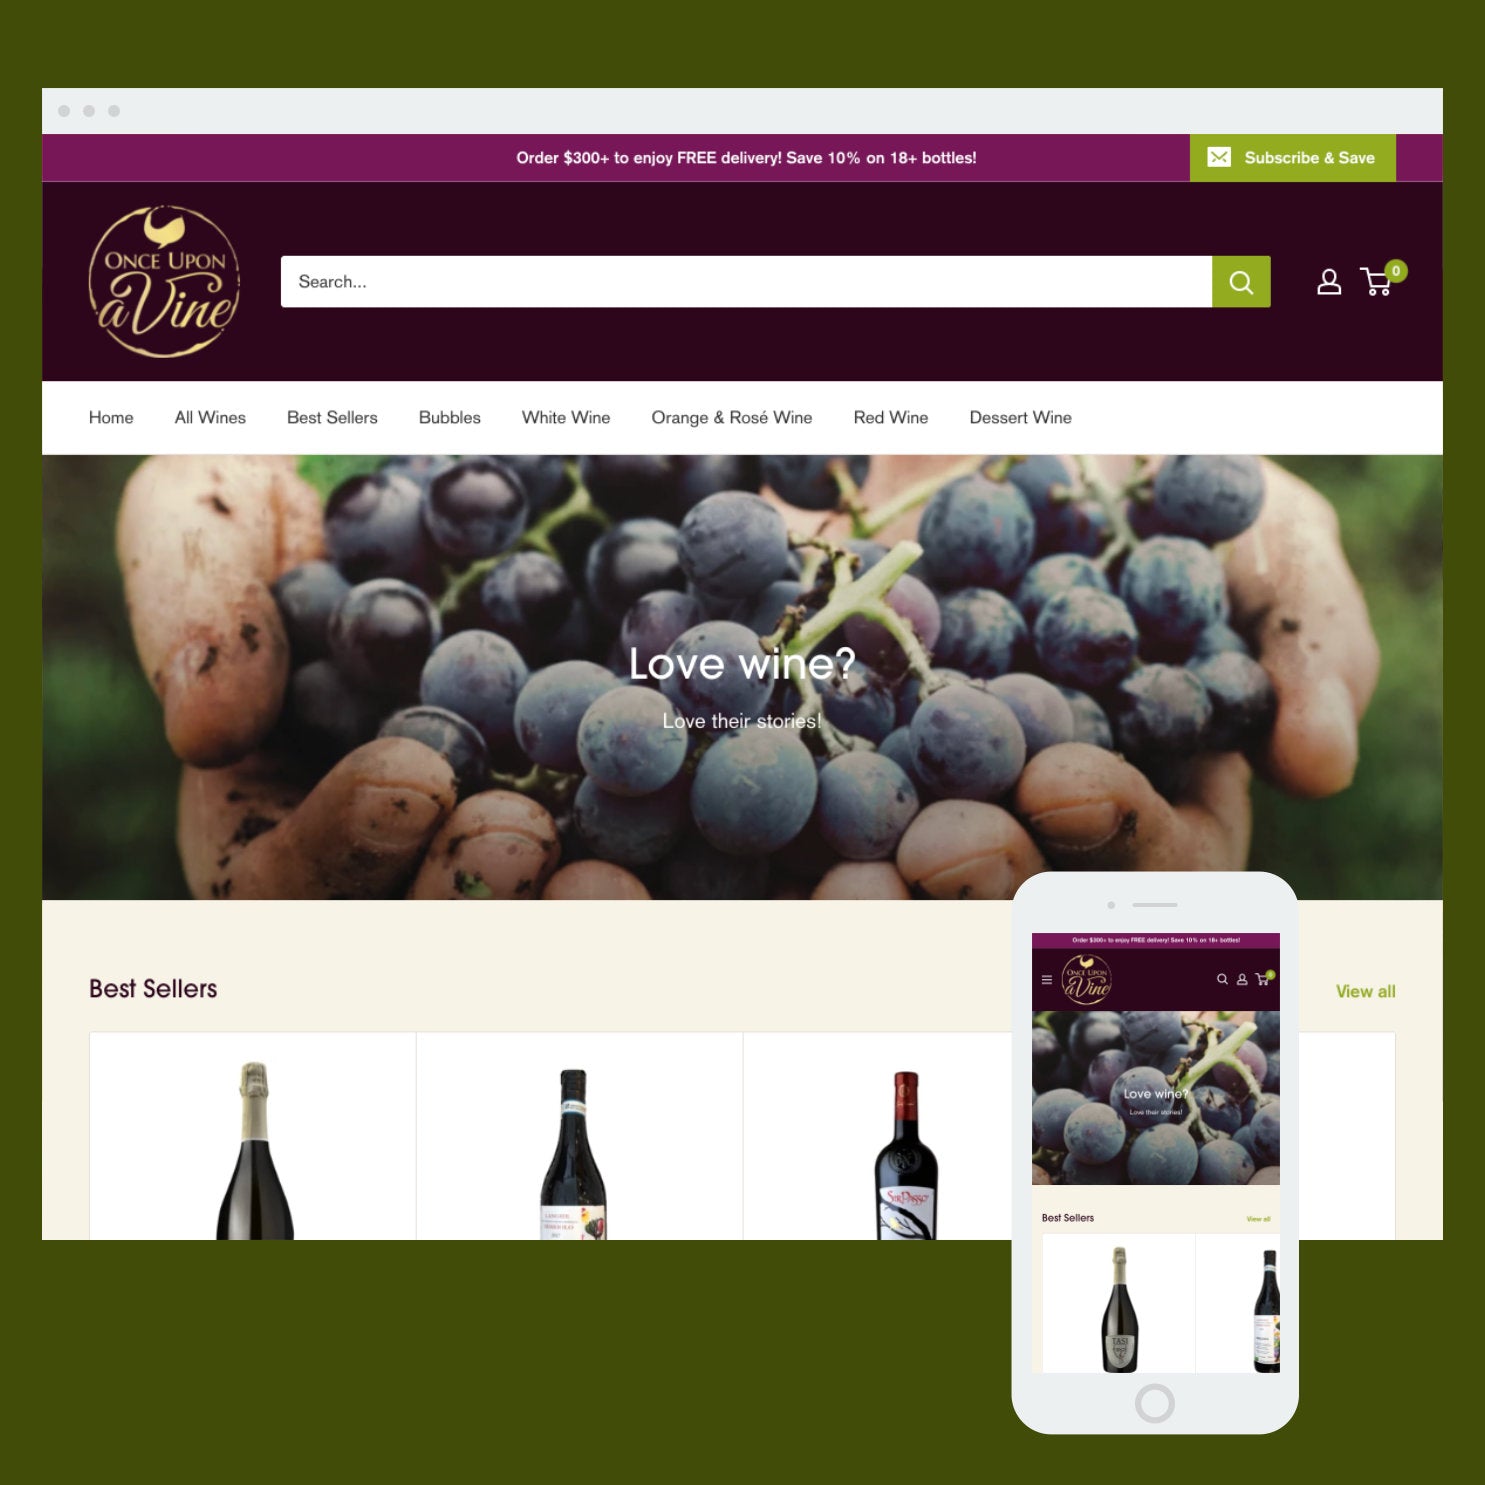 Once Upon a Vine: Shopify store by Cooee Commerce